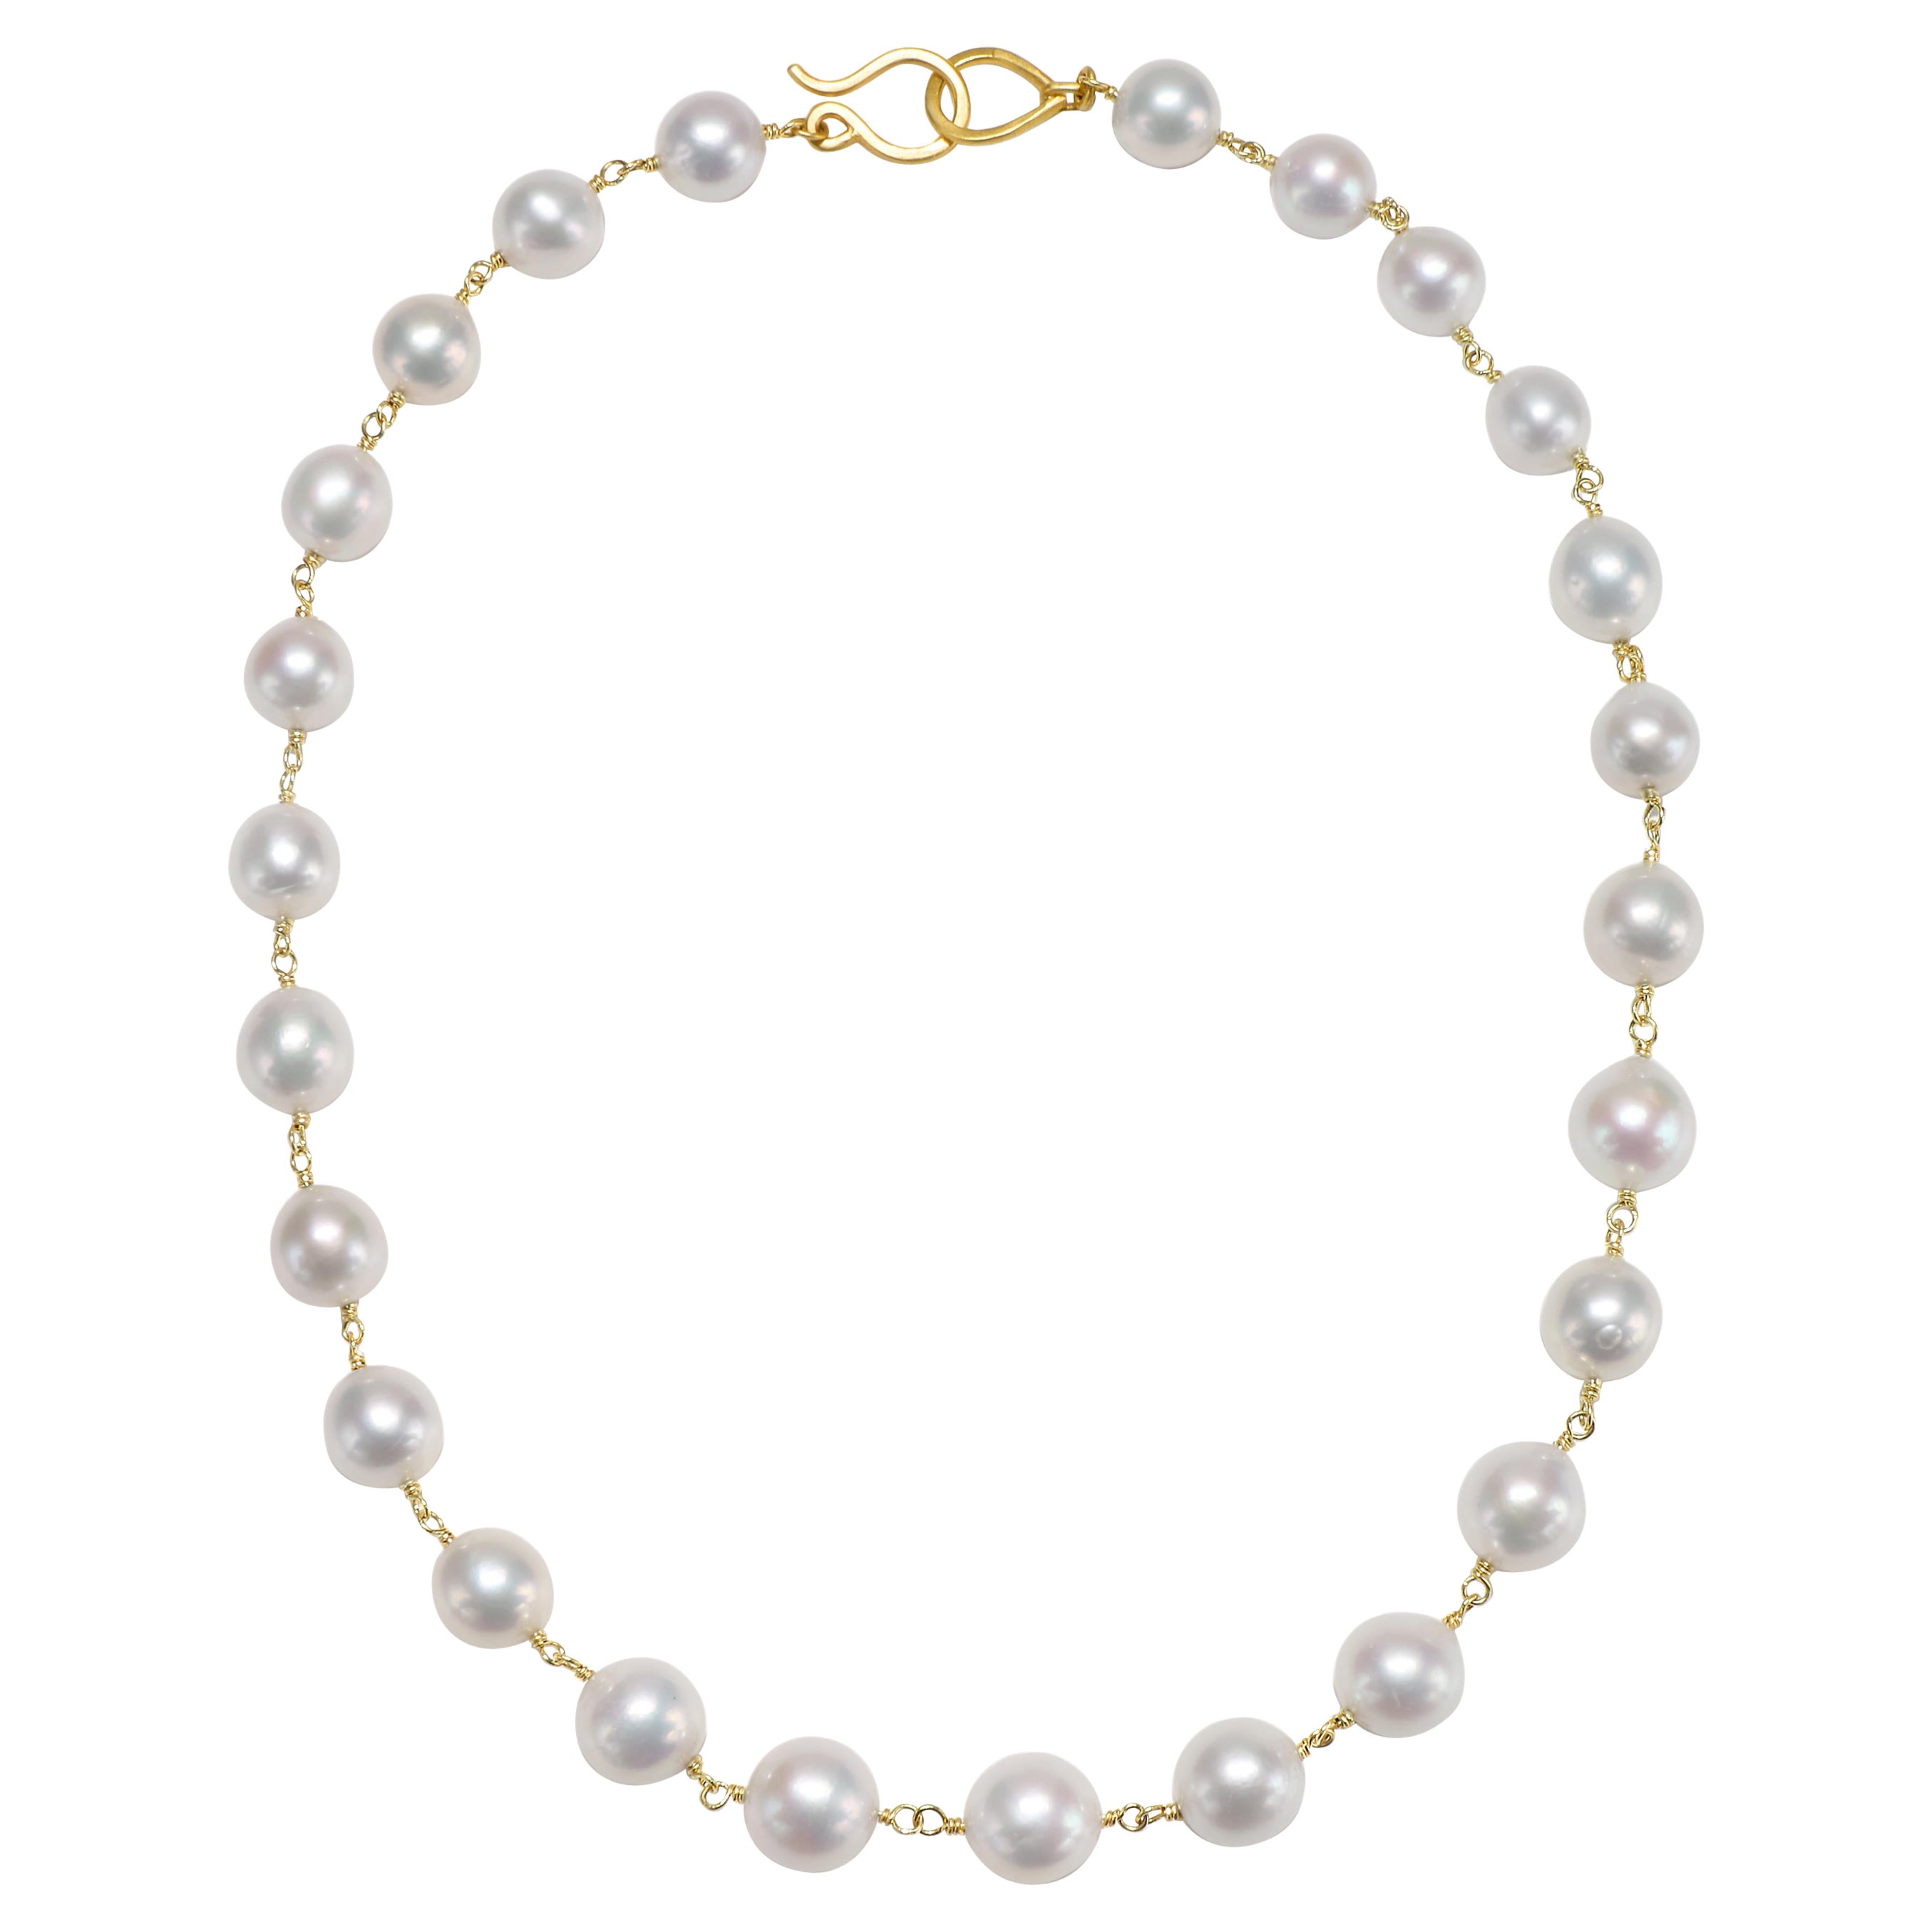 Faye Kim 18 Karat Gold White Freshwater Pearl Hand-Wrapped Chain For Sale